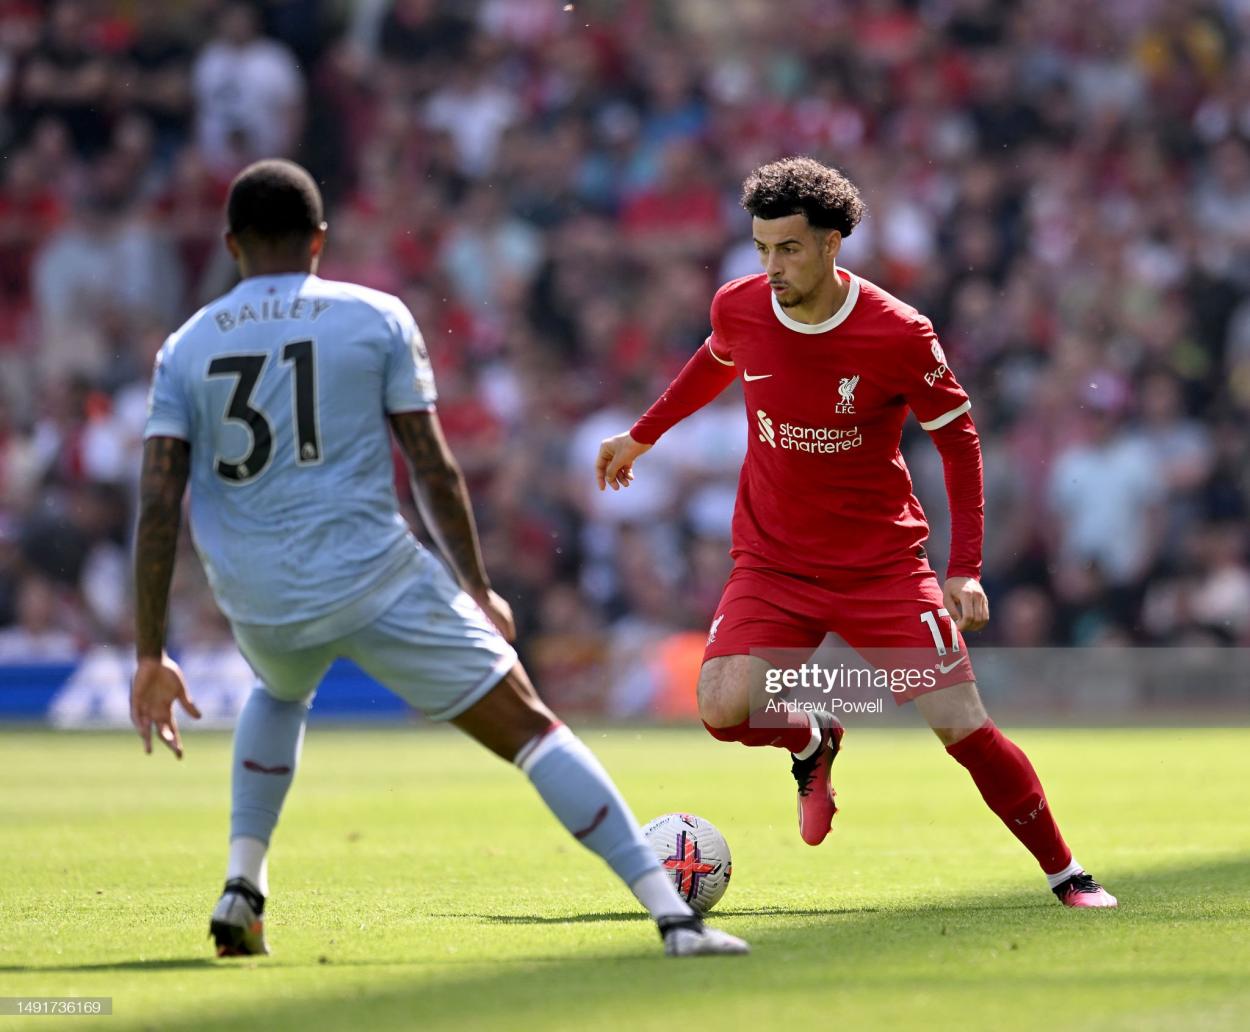 Leon Bailey and Curtis Jones in action at Anfield (Image by Andrew Powell/Getty Images)